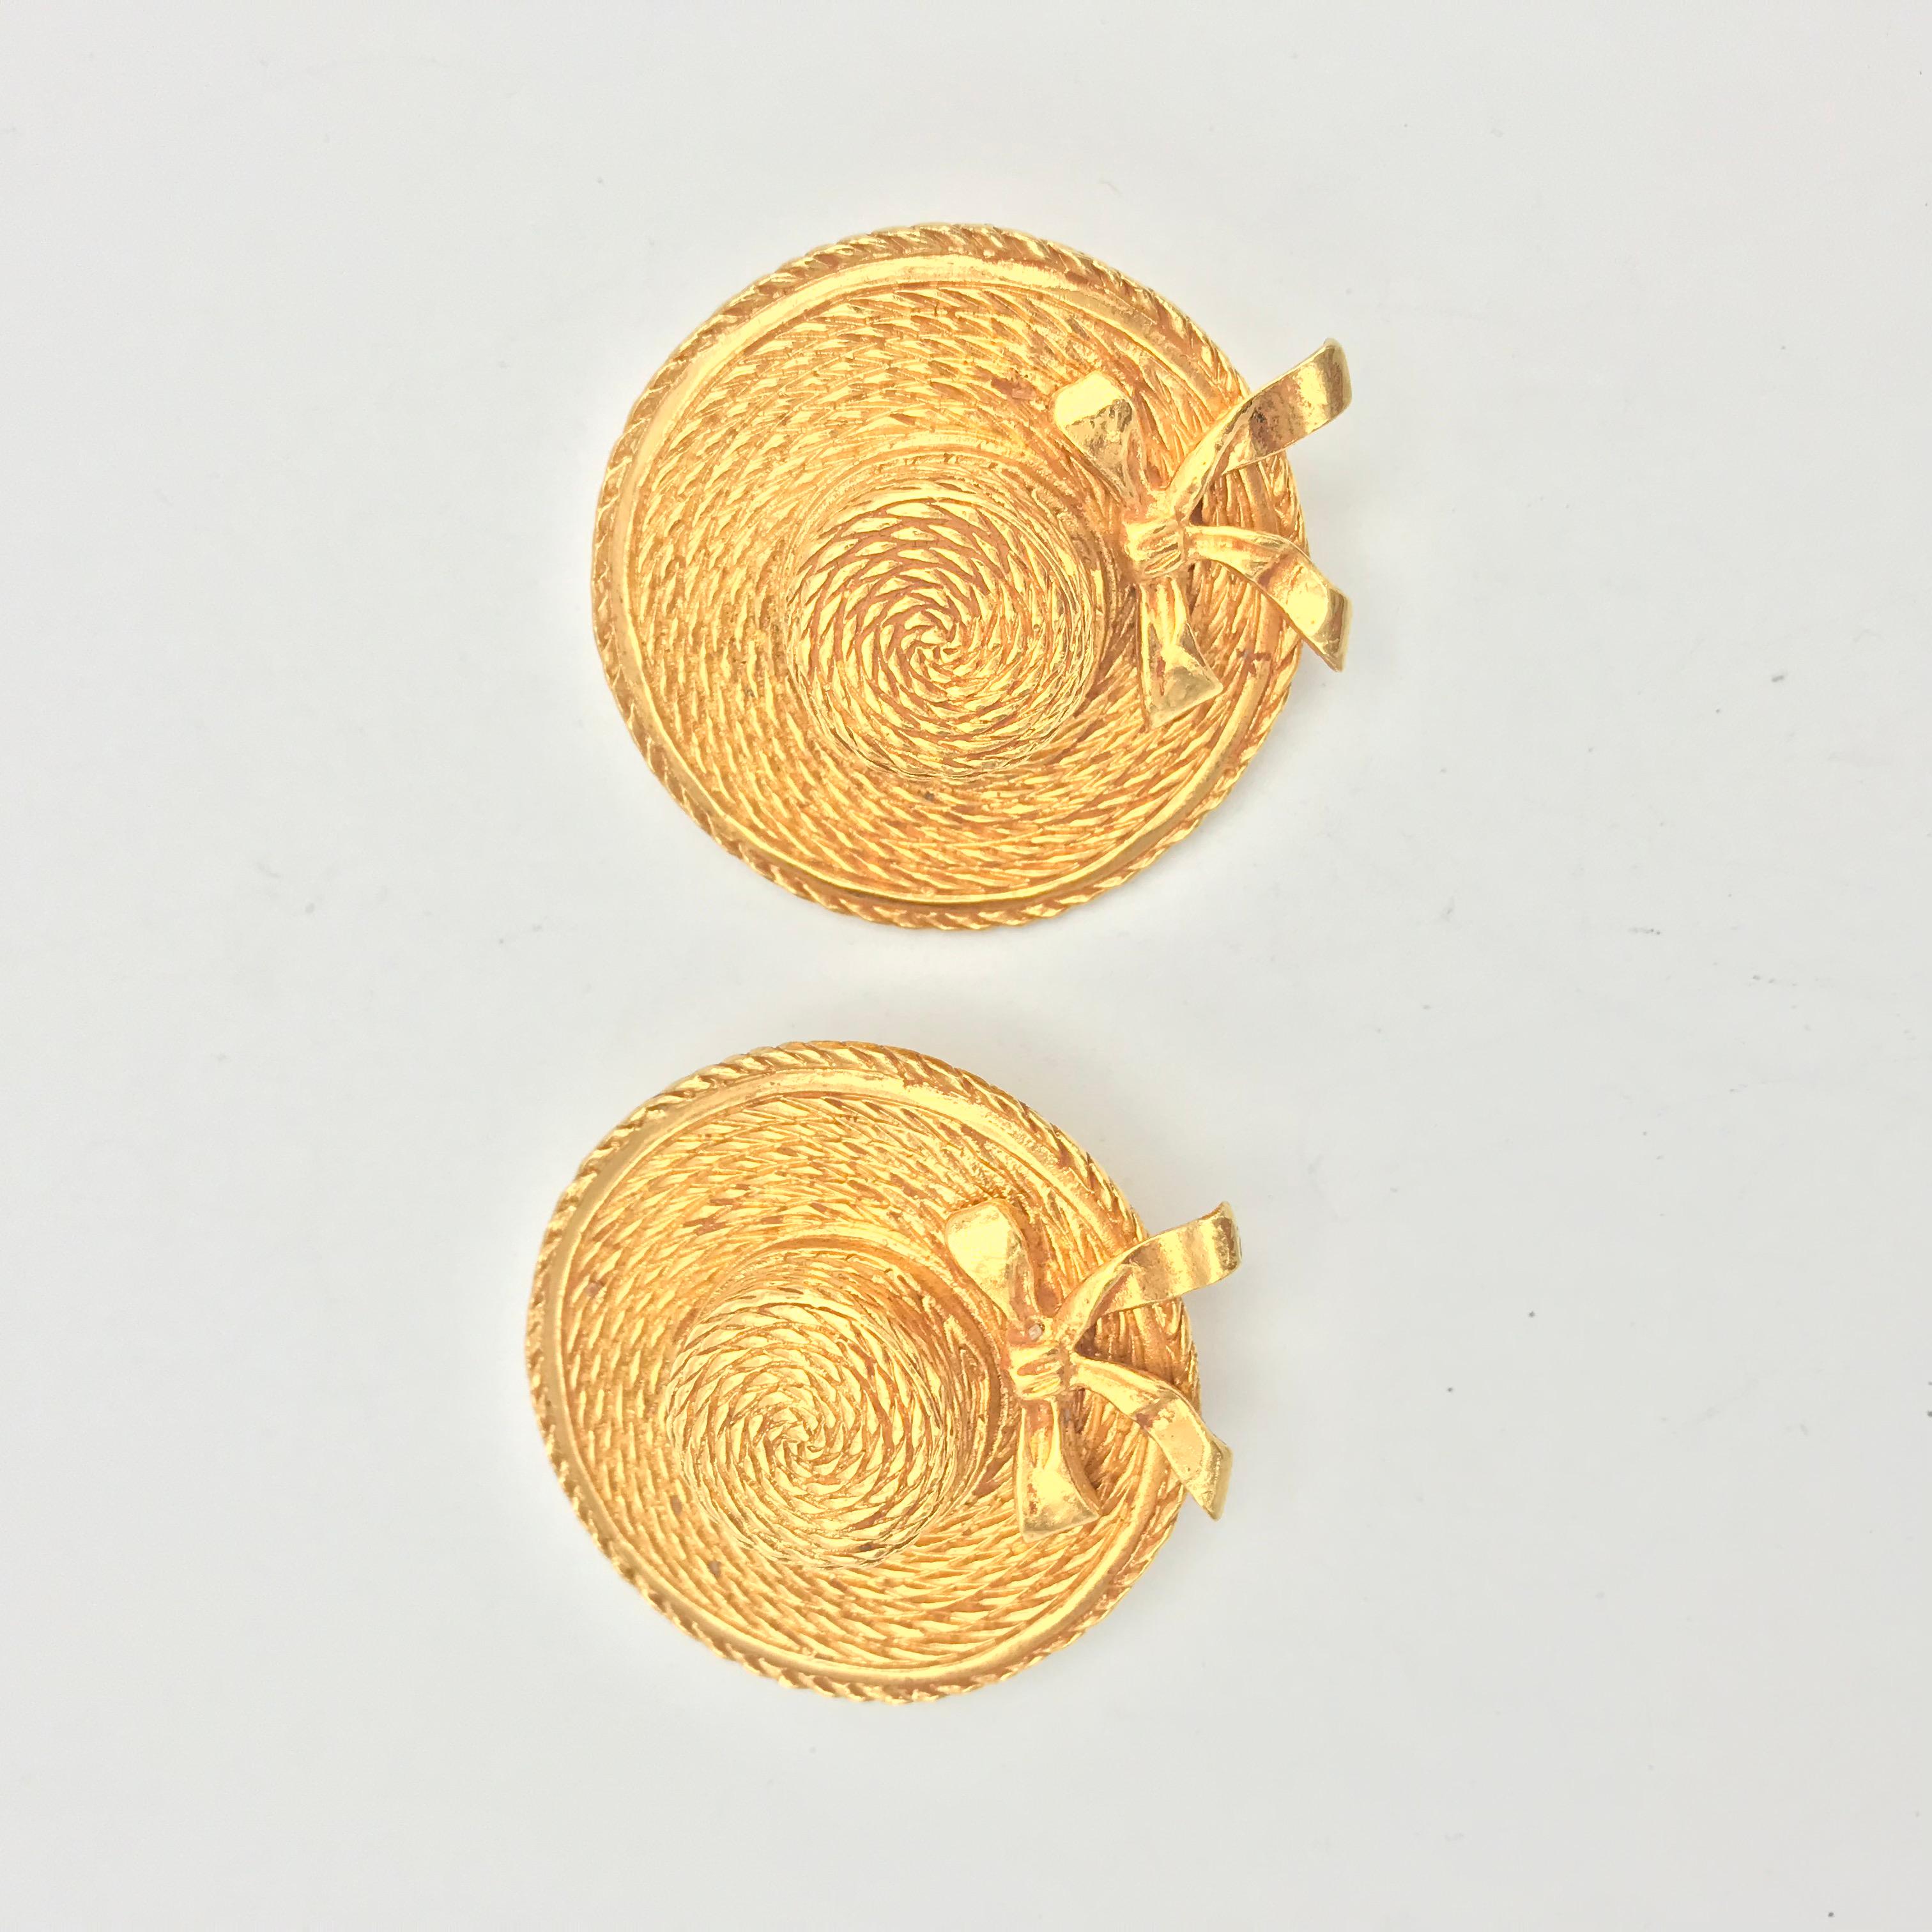 Chanel Clip-on Earrings in the shape of a hat, signed 1970/80s gold plated  For Sale 7